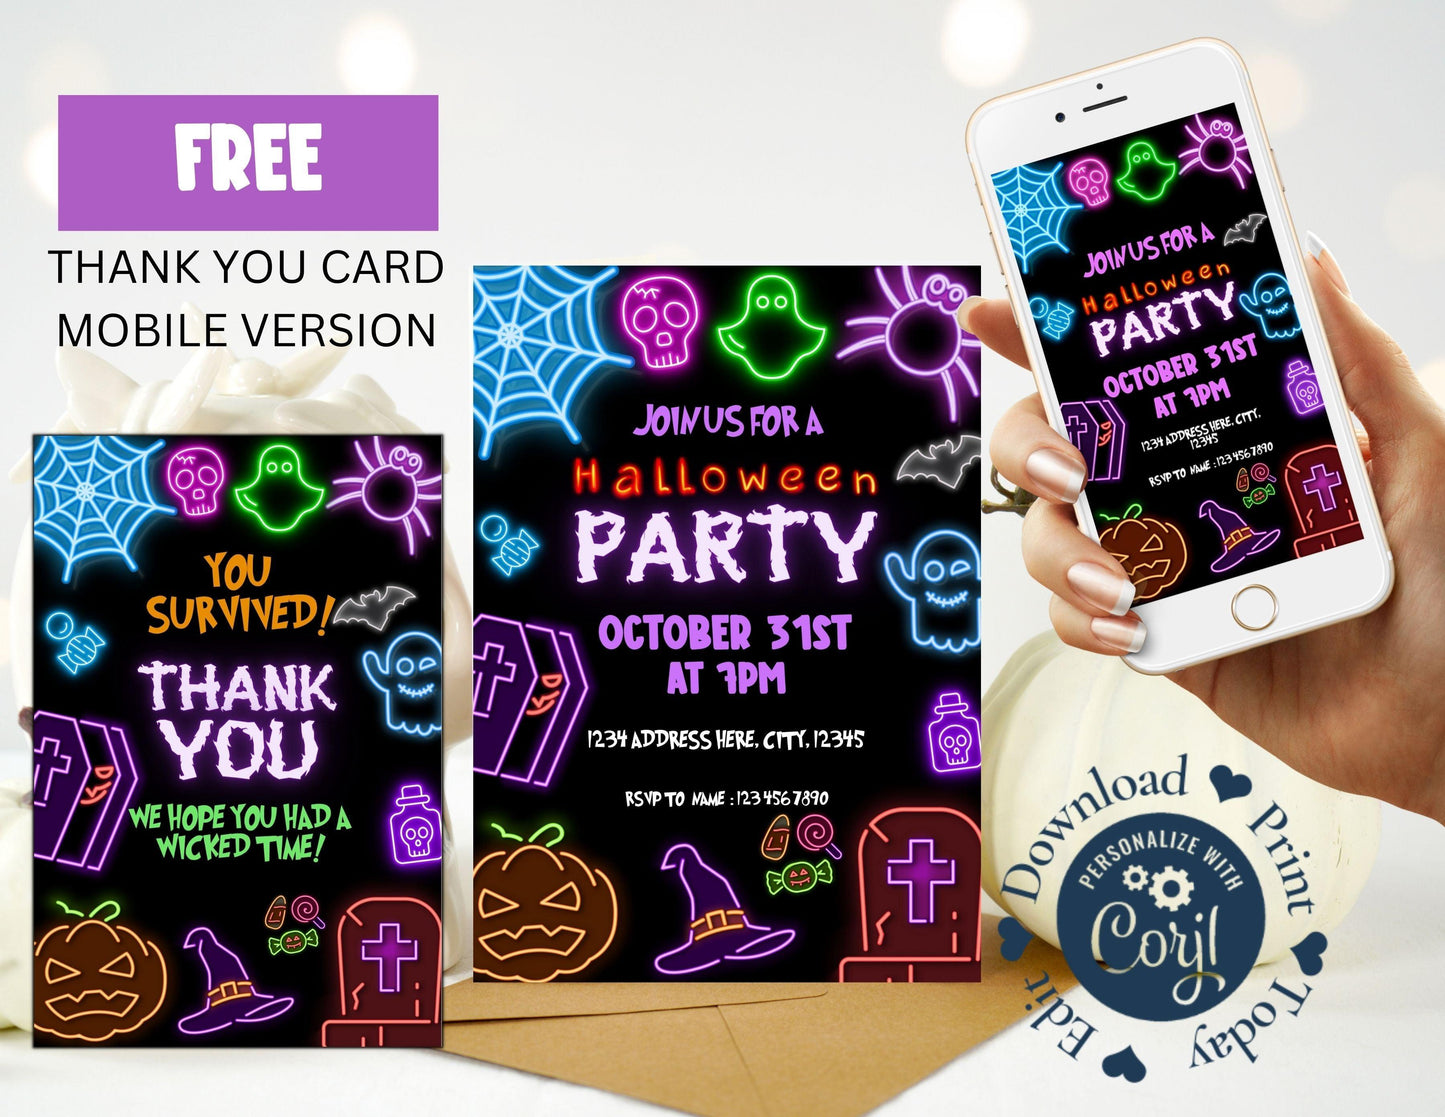 Halloween Party Invitation with FREE Thank You Card - Invitations - Mama Life Printables